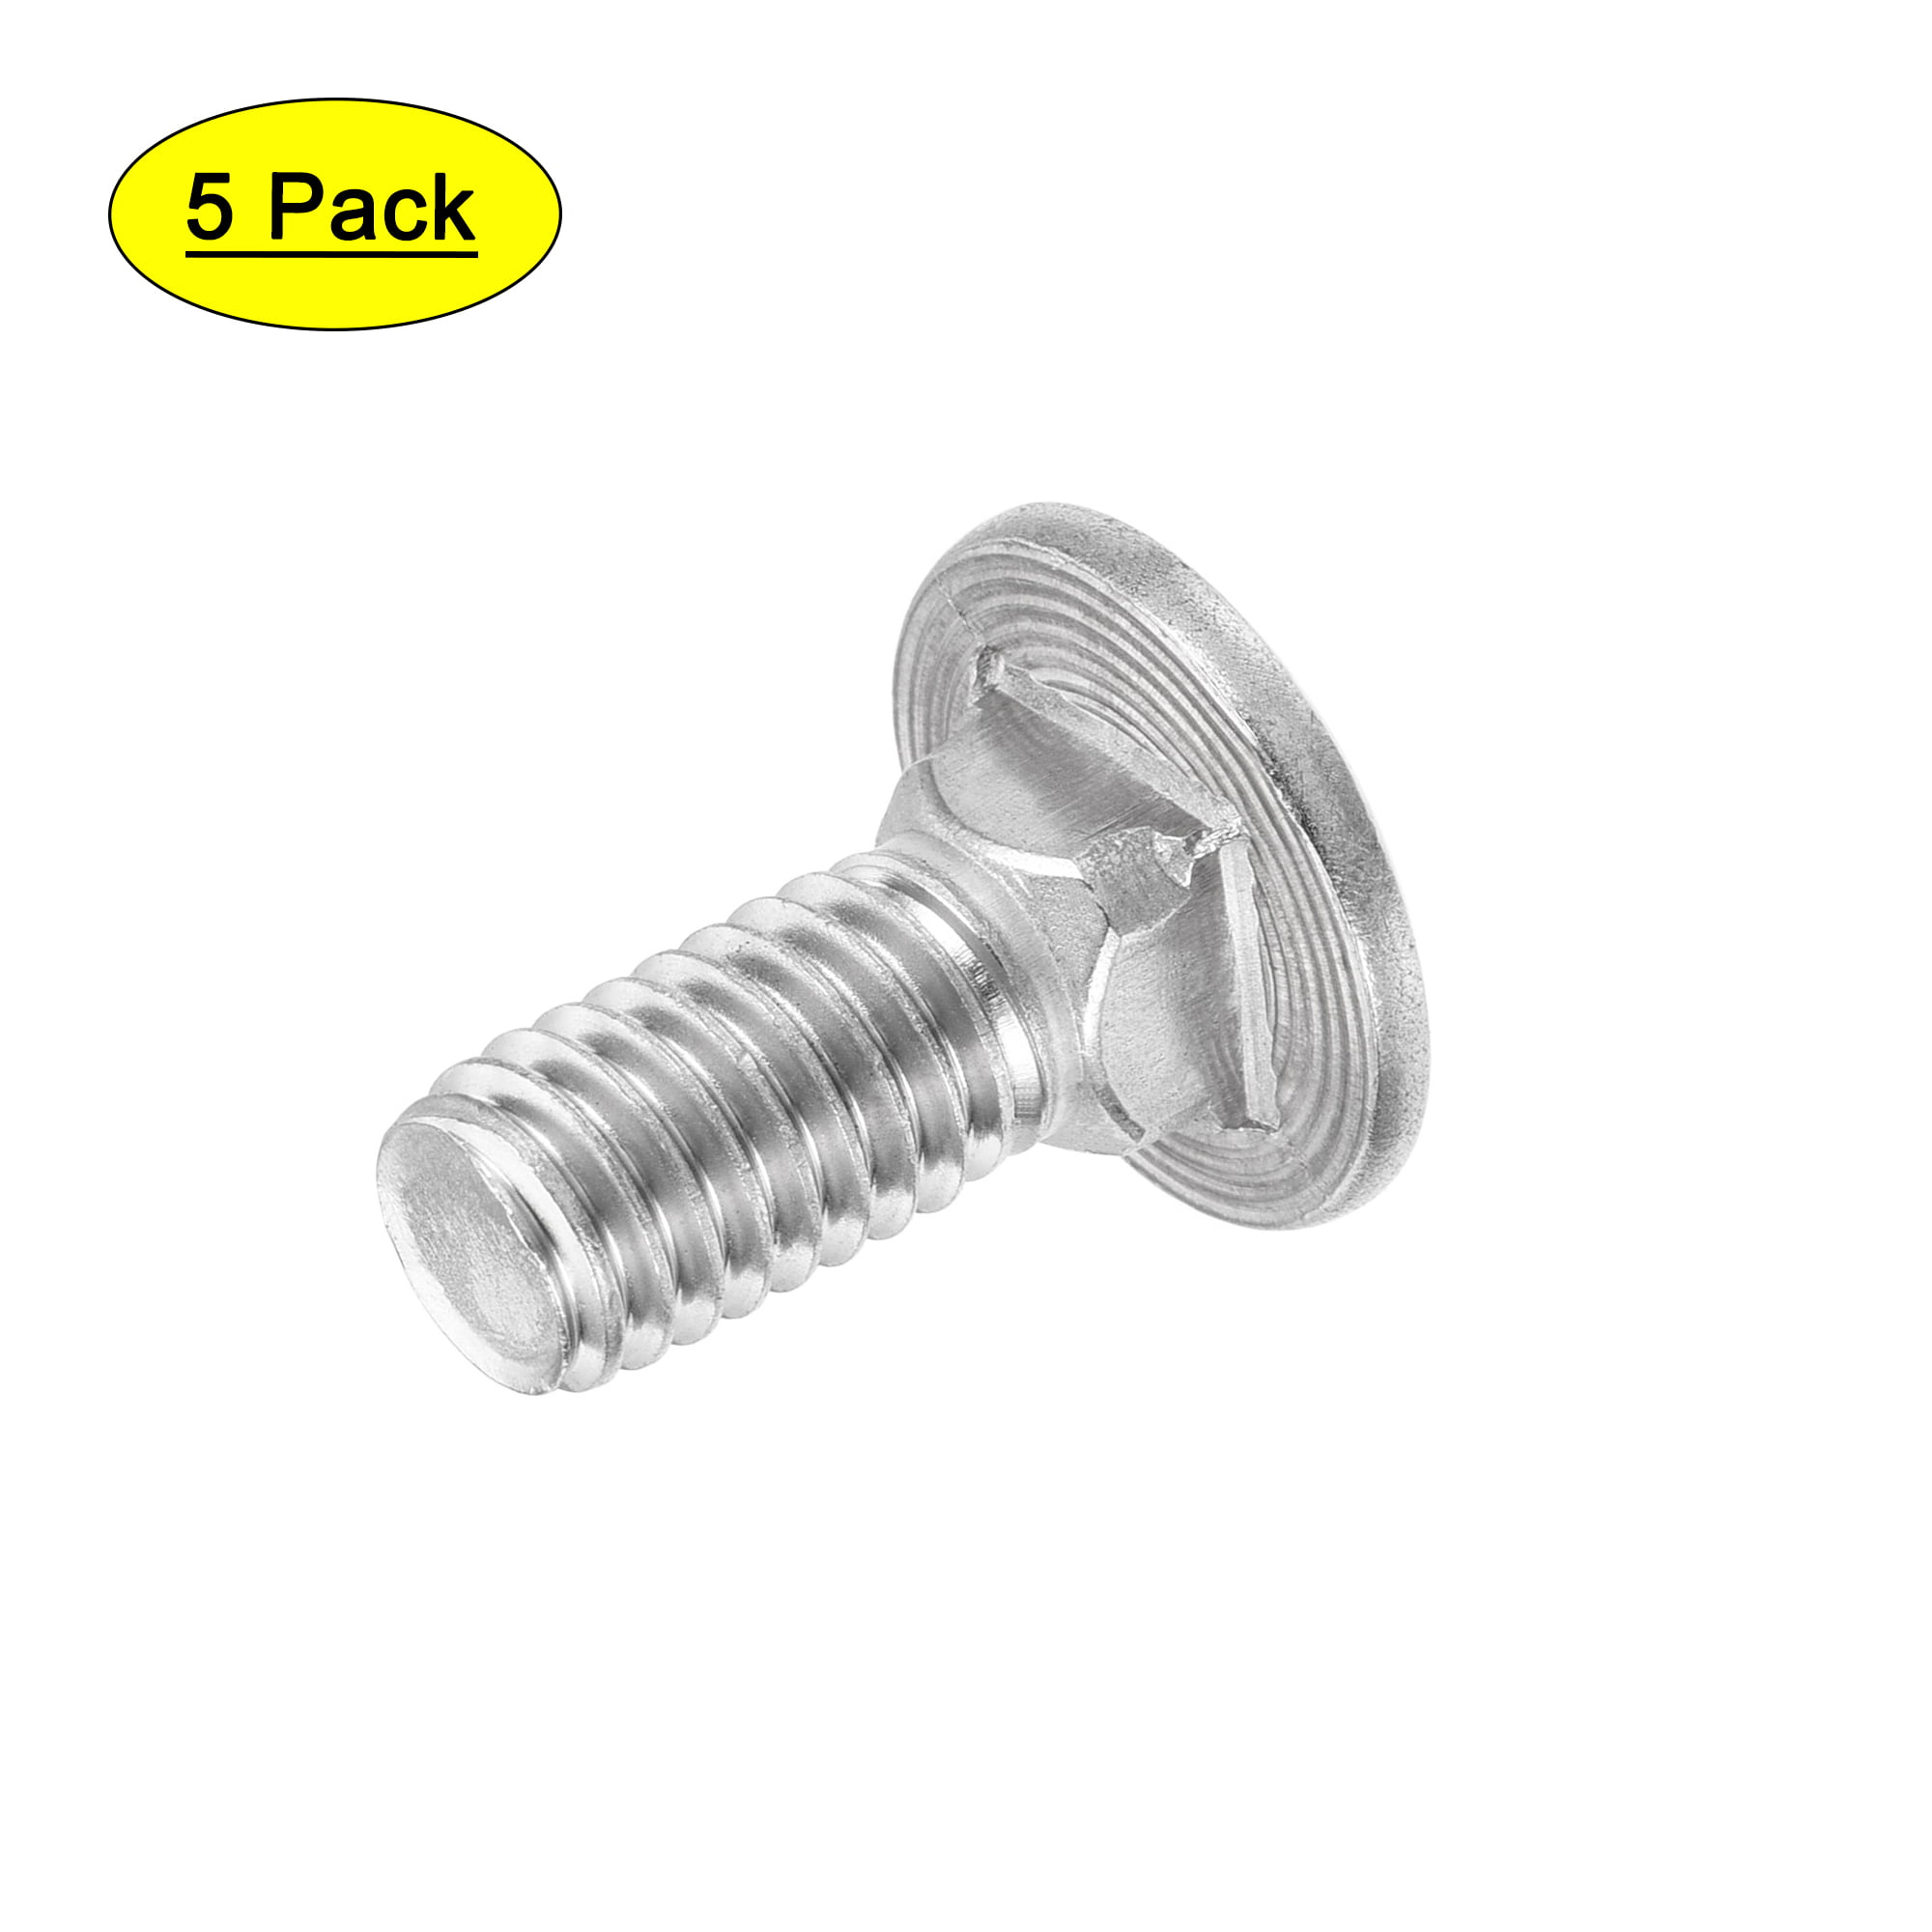 3/8" A2 Stainless Steel UNC Dome Nuts 2 Pack Free P&P